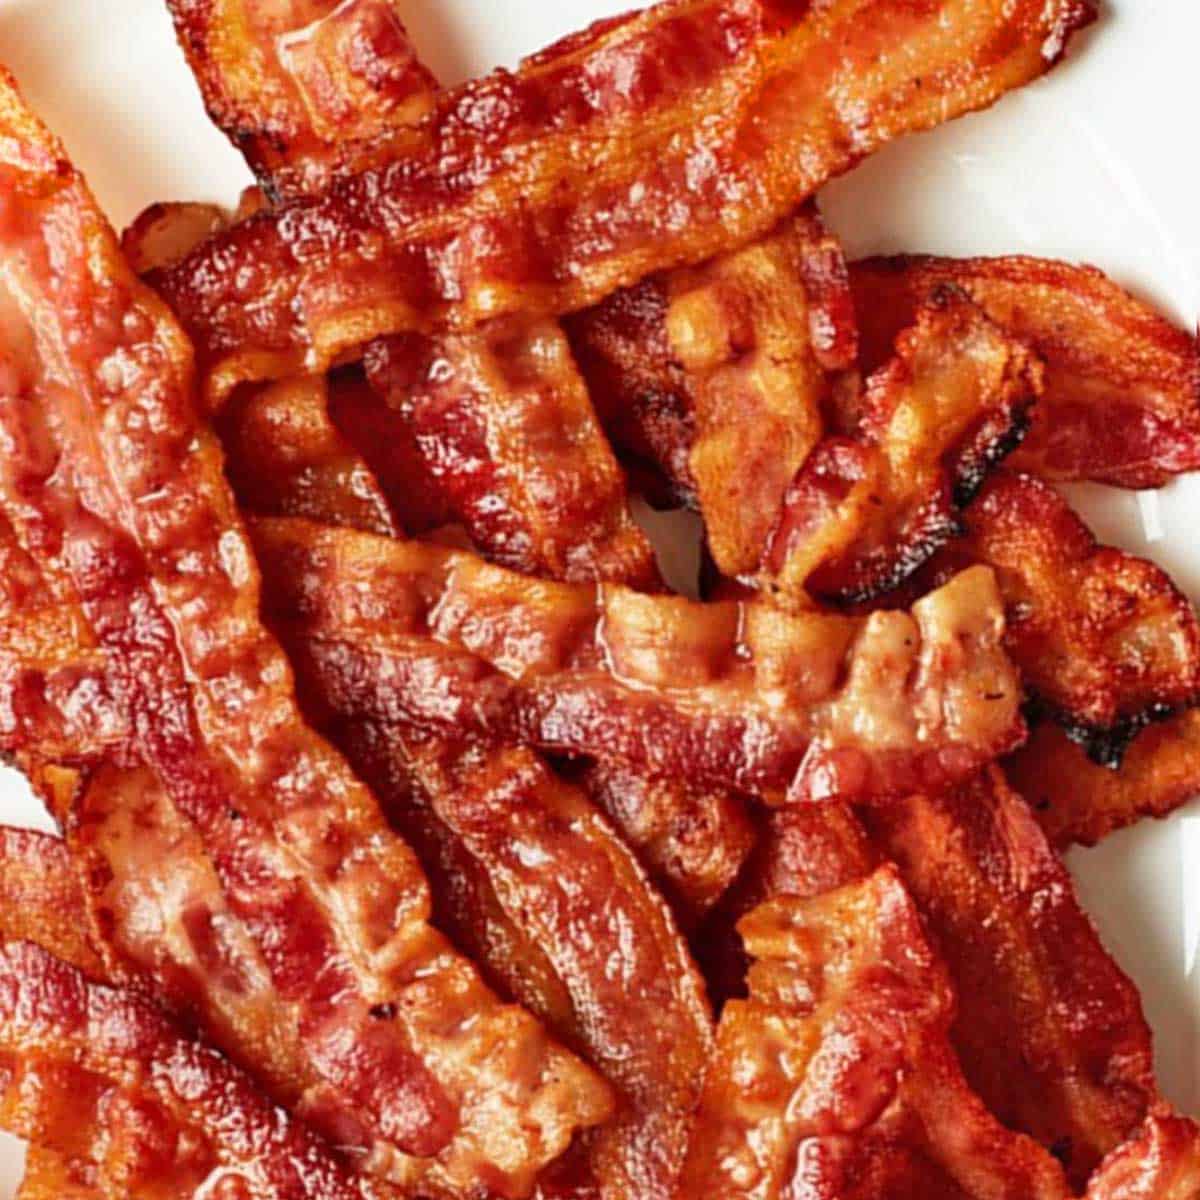 A pound of crispy, golden brown bacon cooked in the oven.